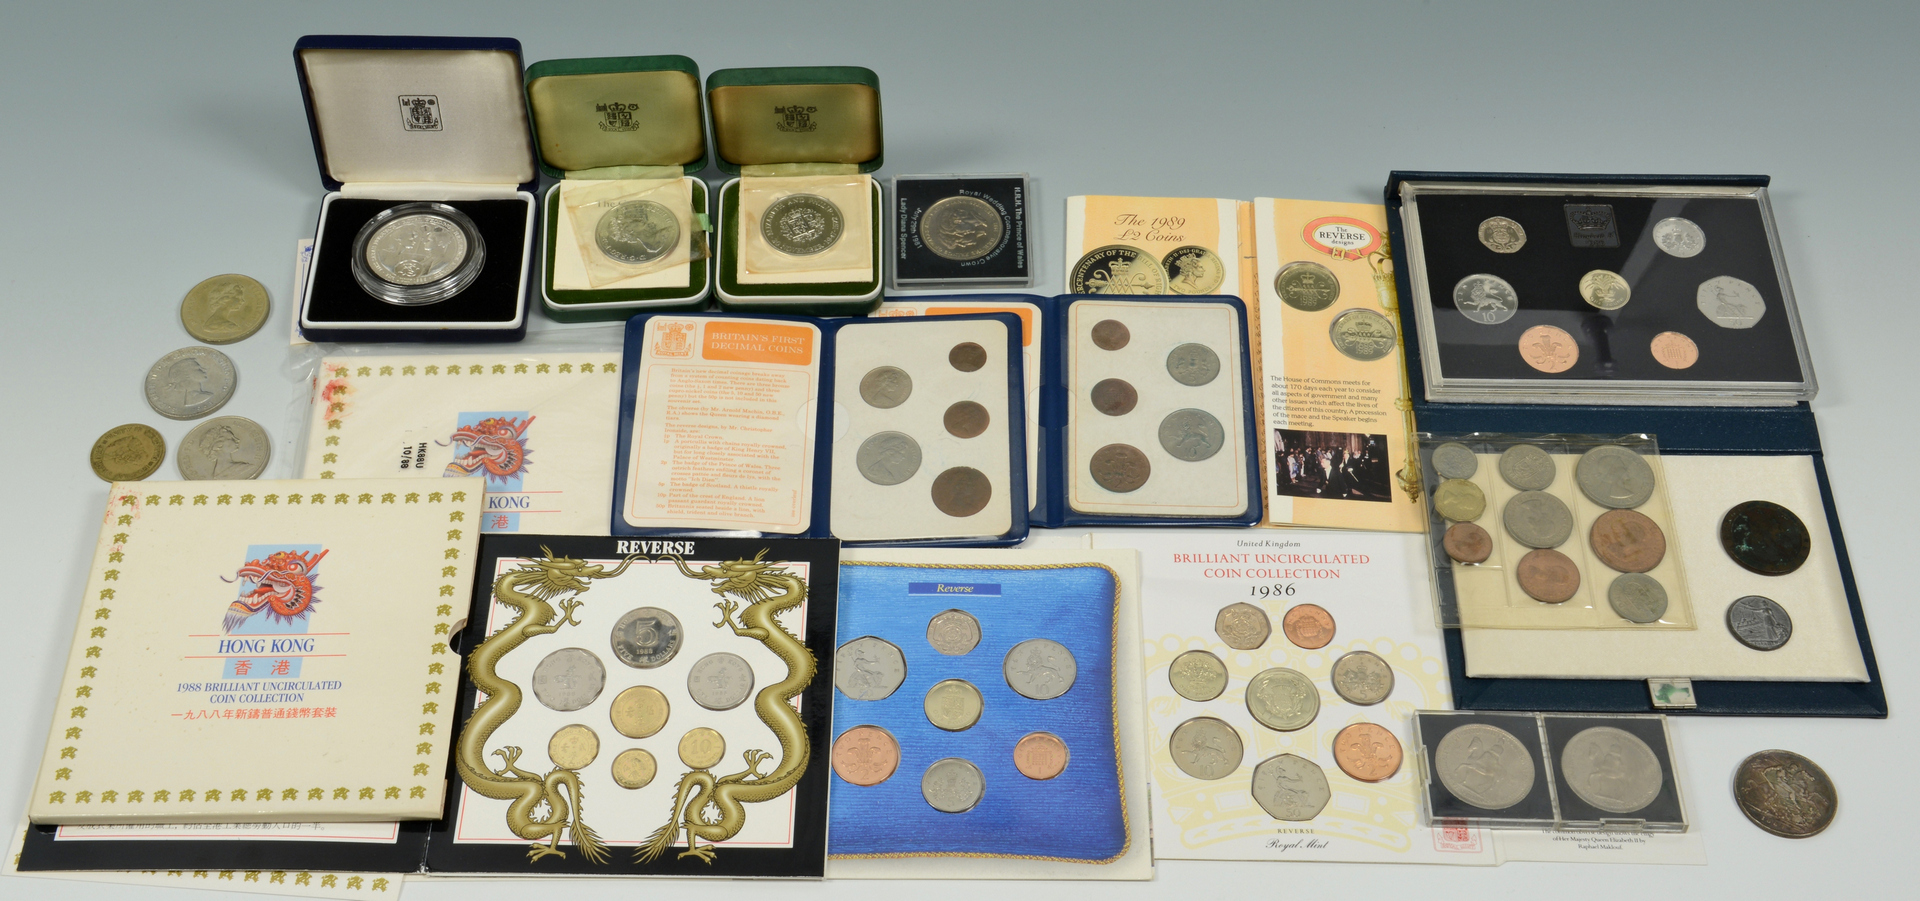 Lot 3088303: Grouping of UK Commemorative Coins & Medals